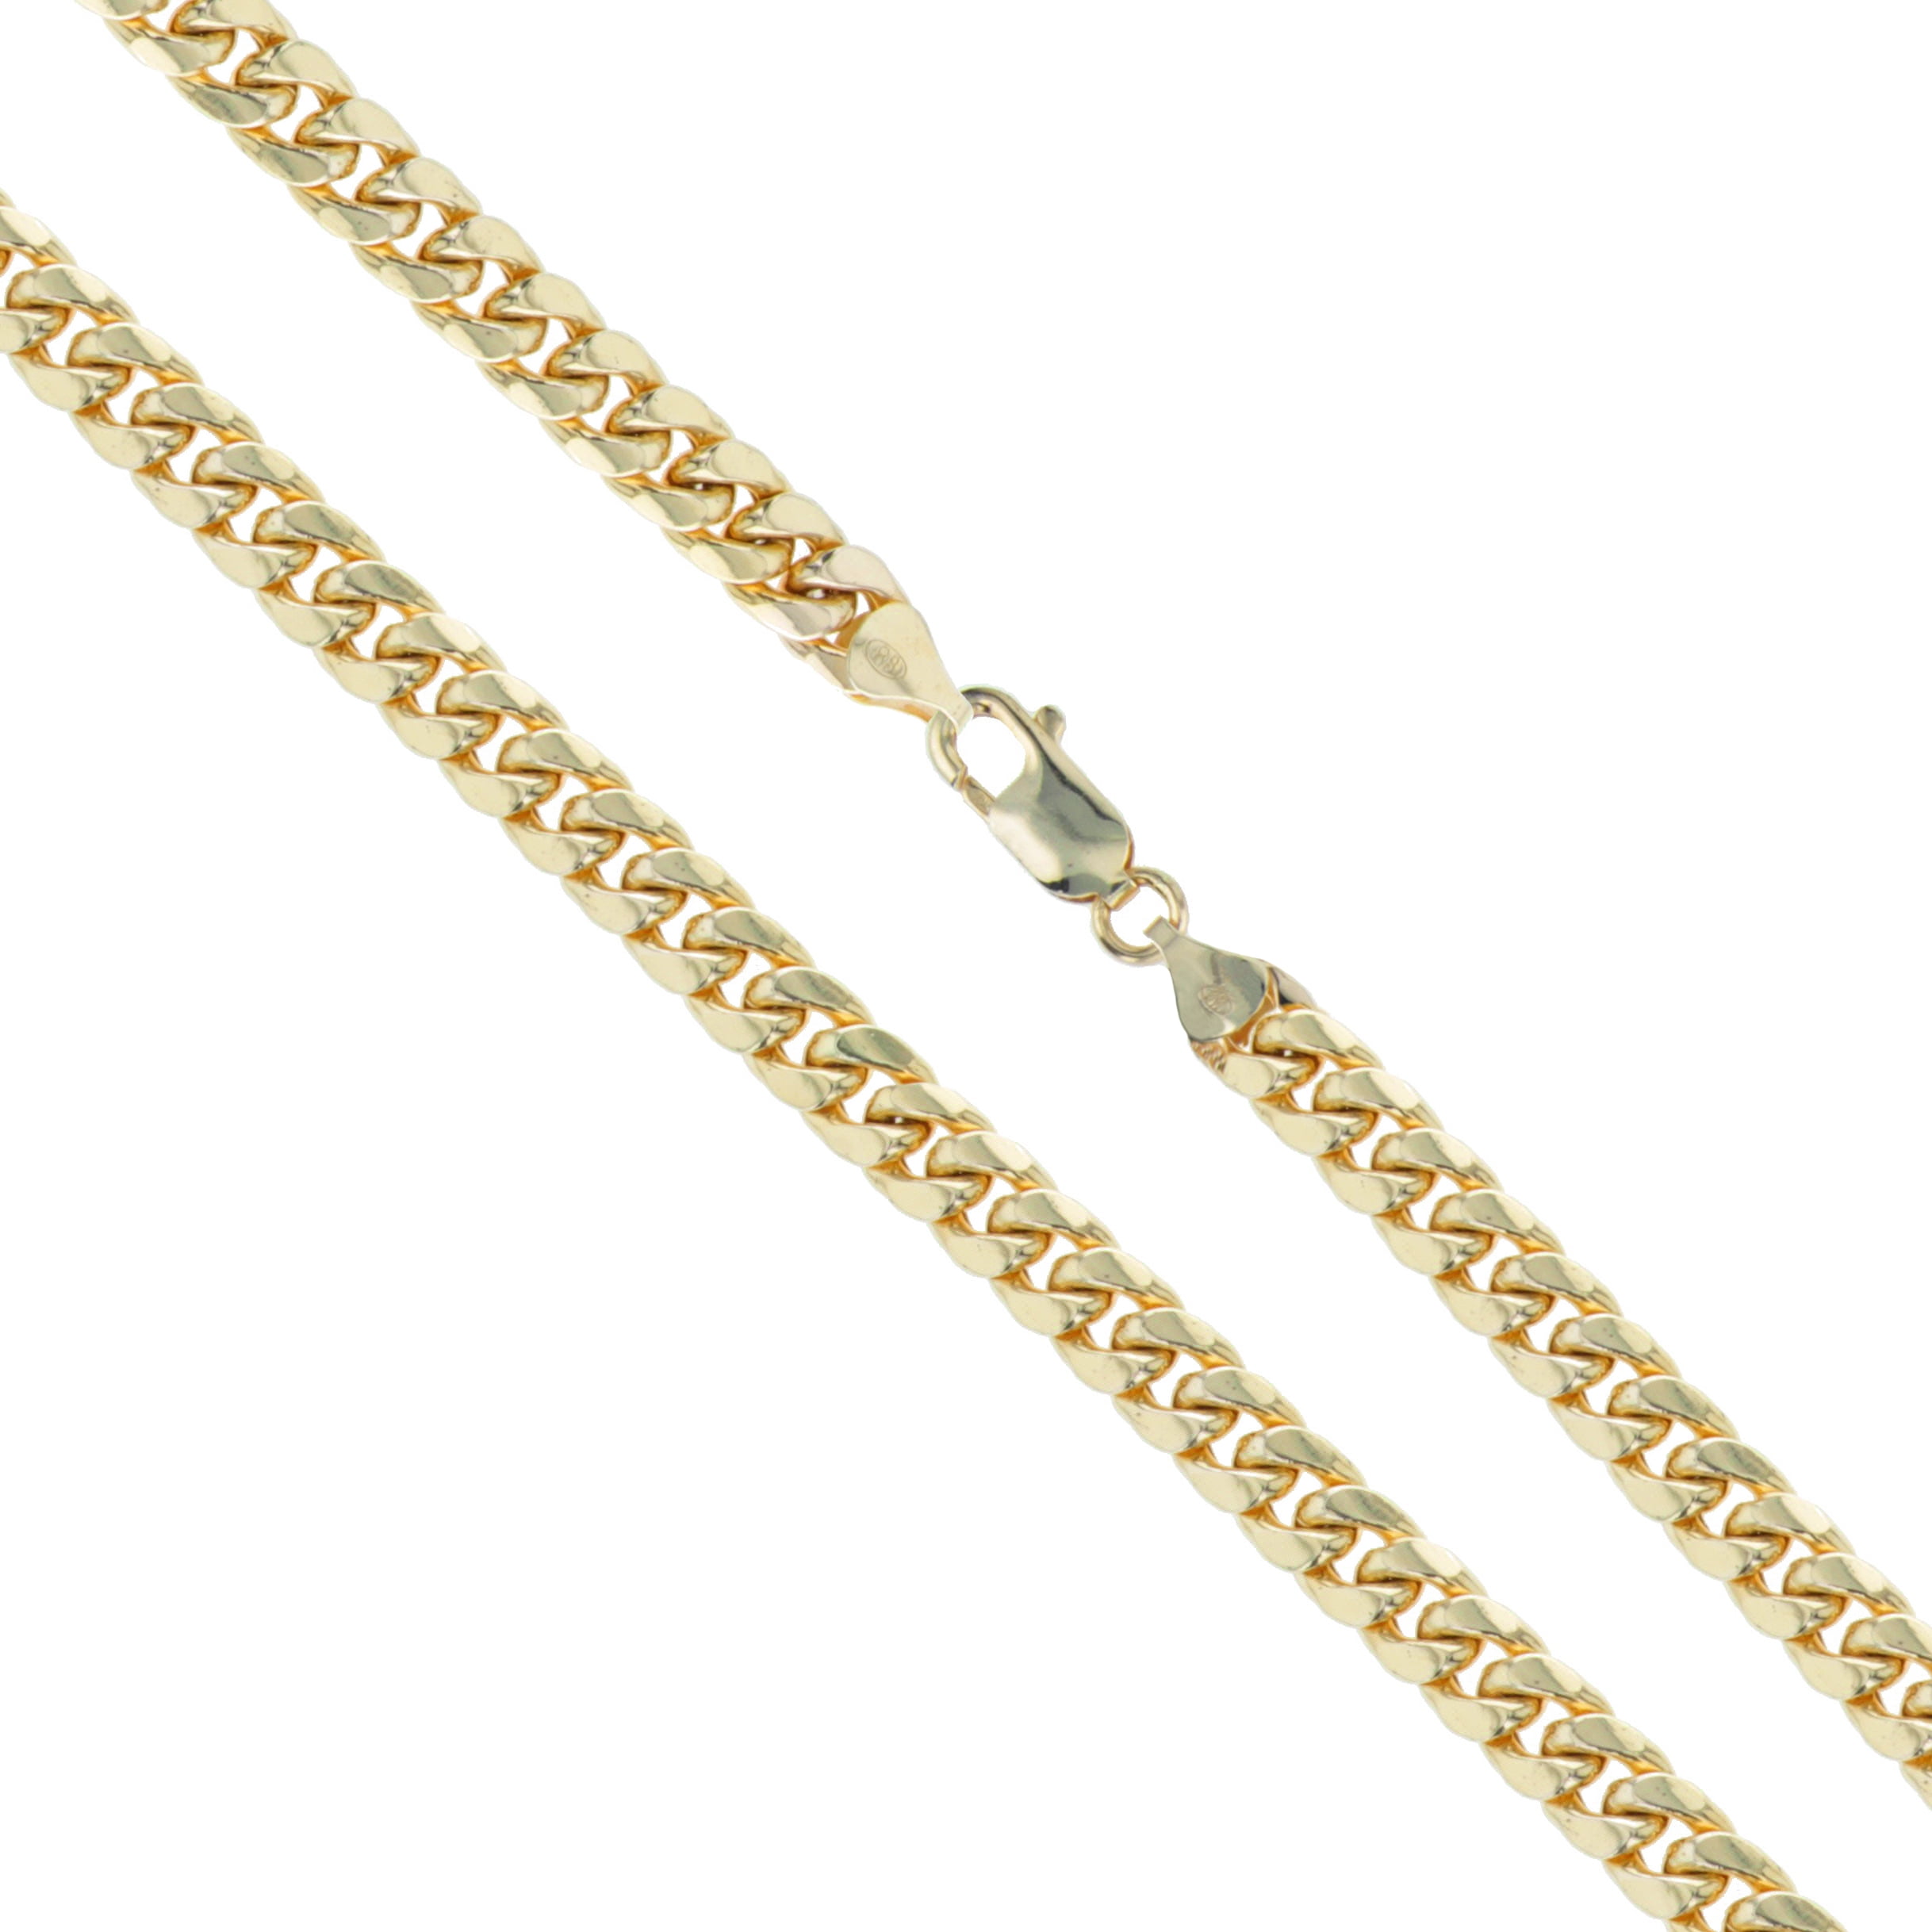 Real 14k Solid Yellow Gold Cuban Link Miami Chain Necklace 2.5MM 18" inch 2.5 MM 